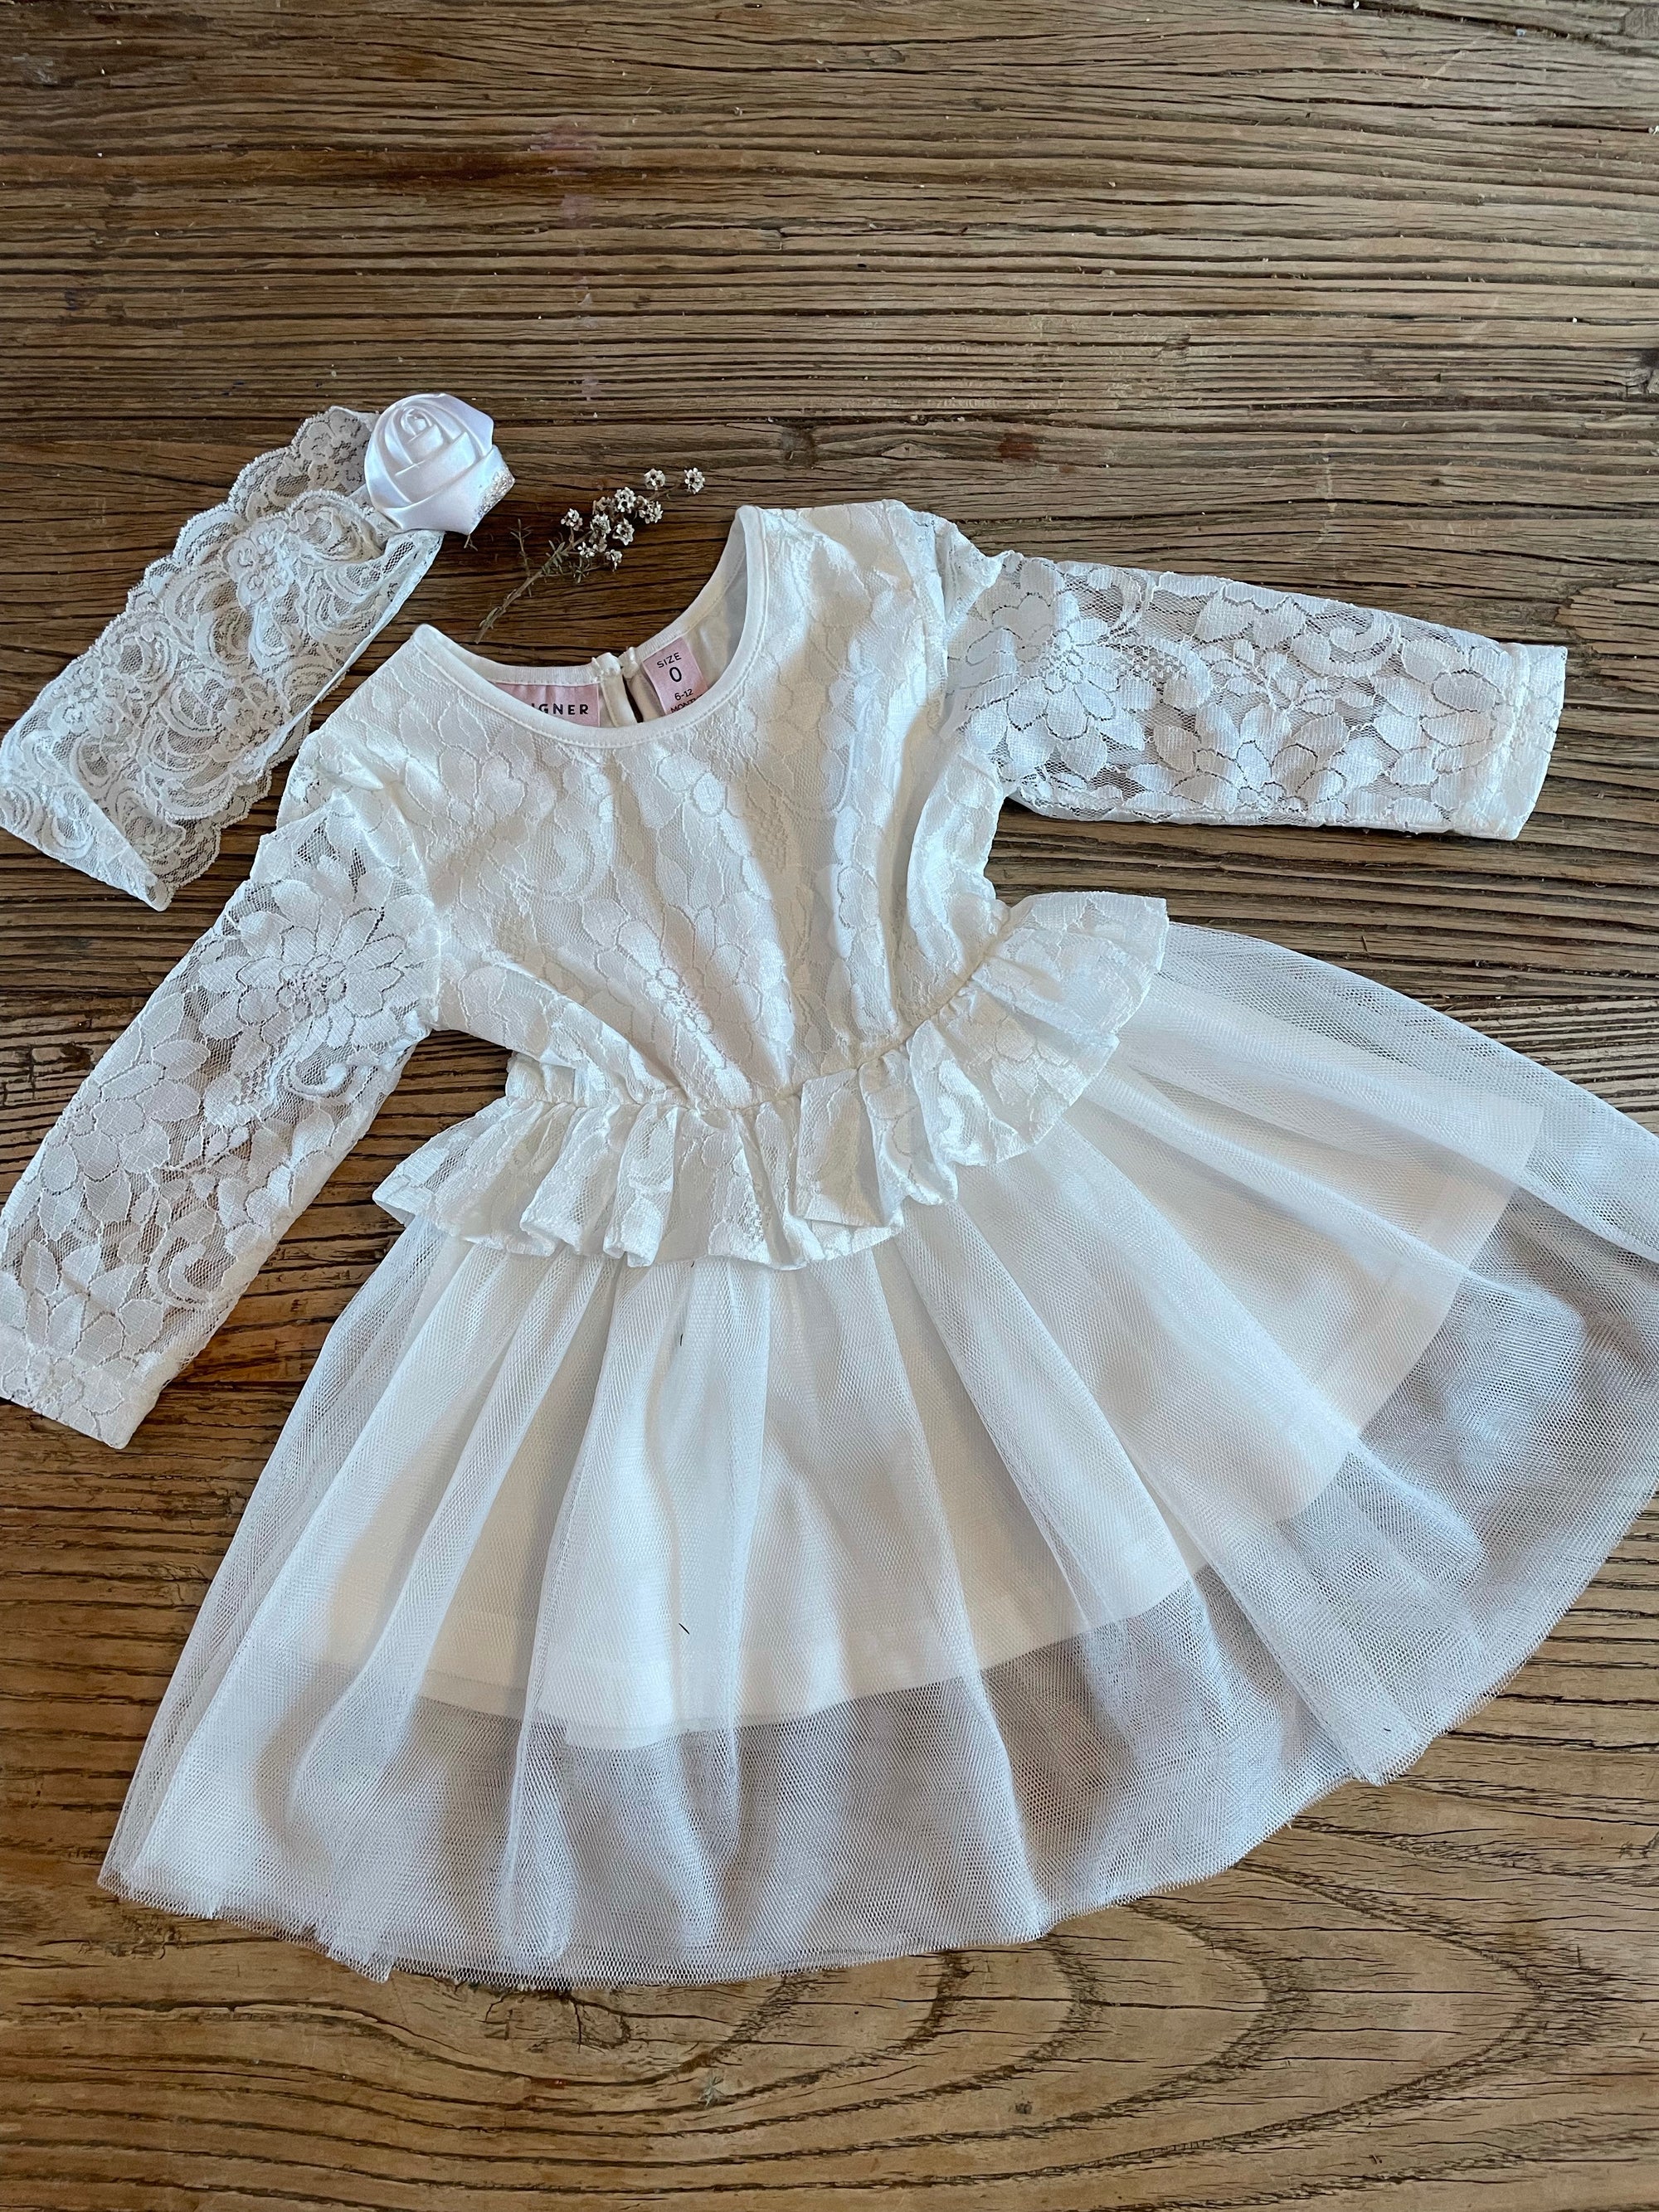 Christening or party outfit